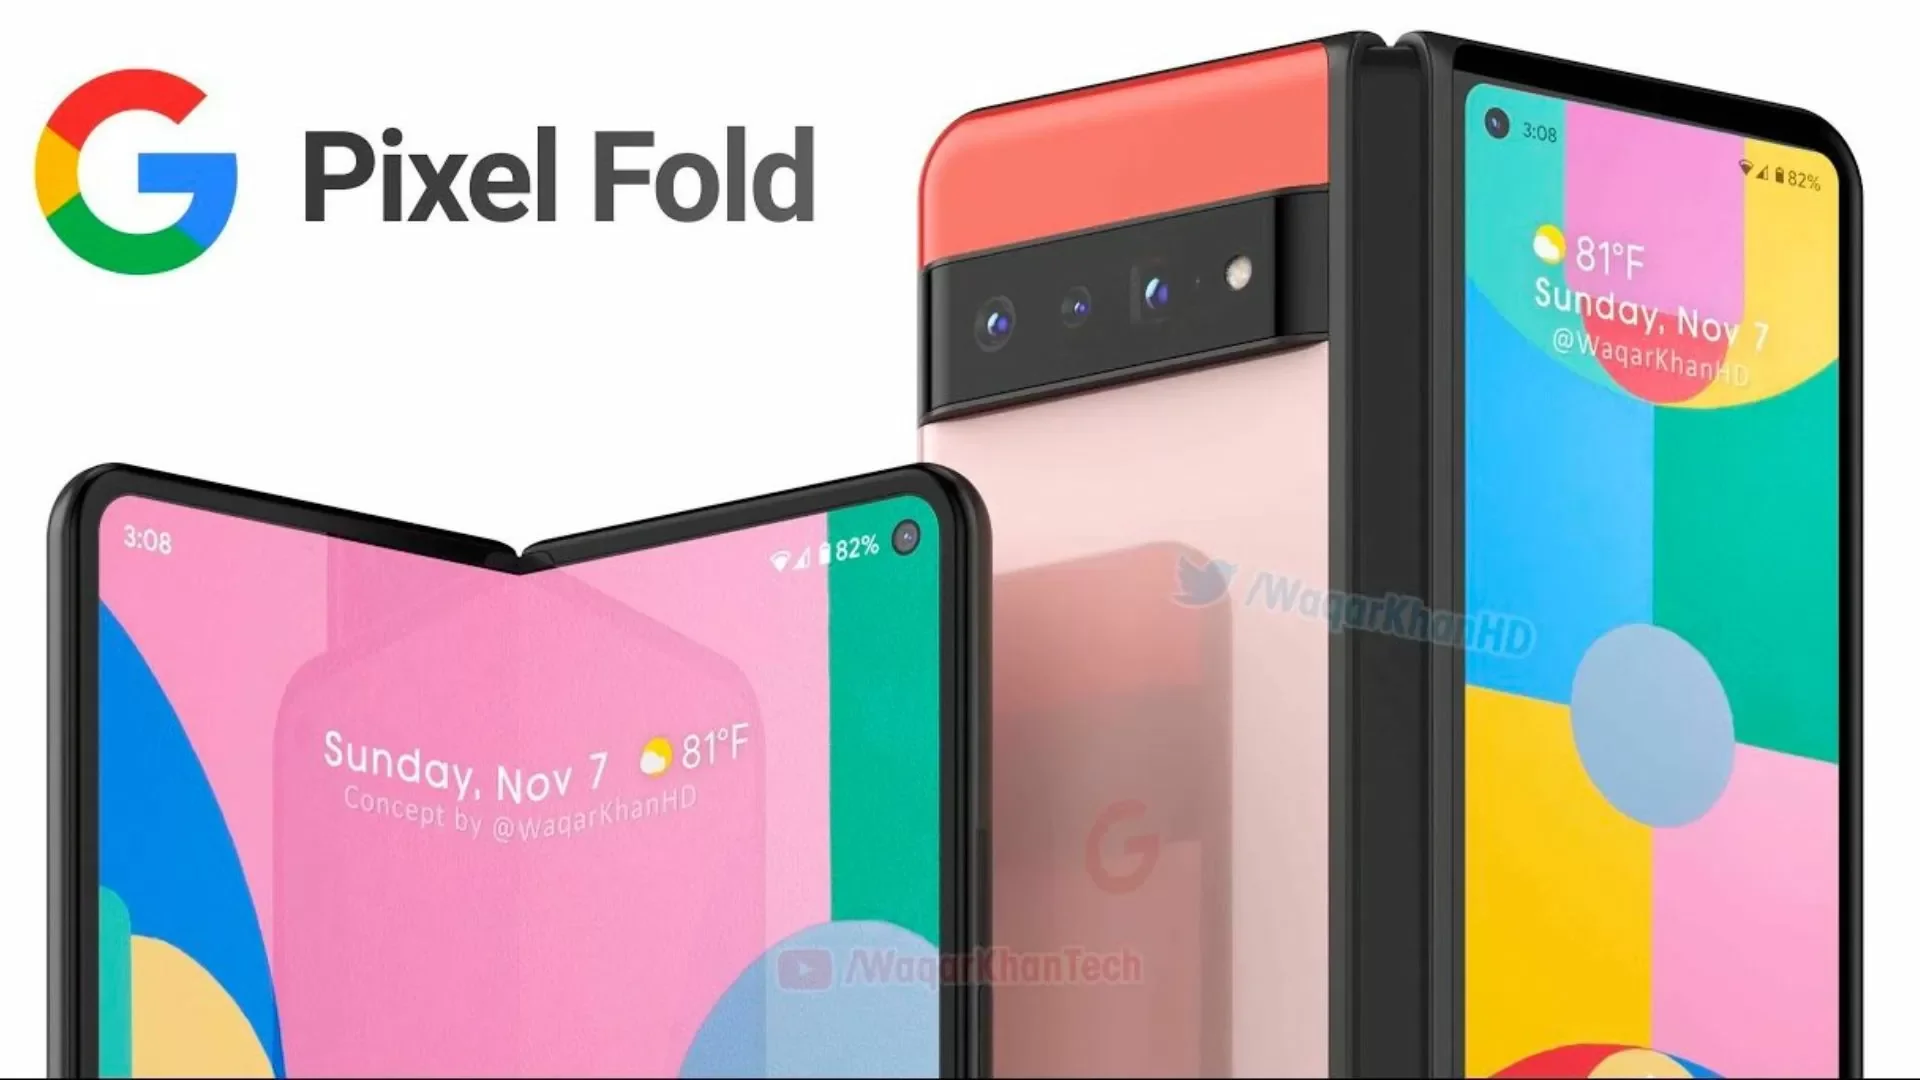 An authoritative insider has published the specifications of the Google Pixel Fold